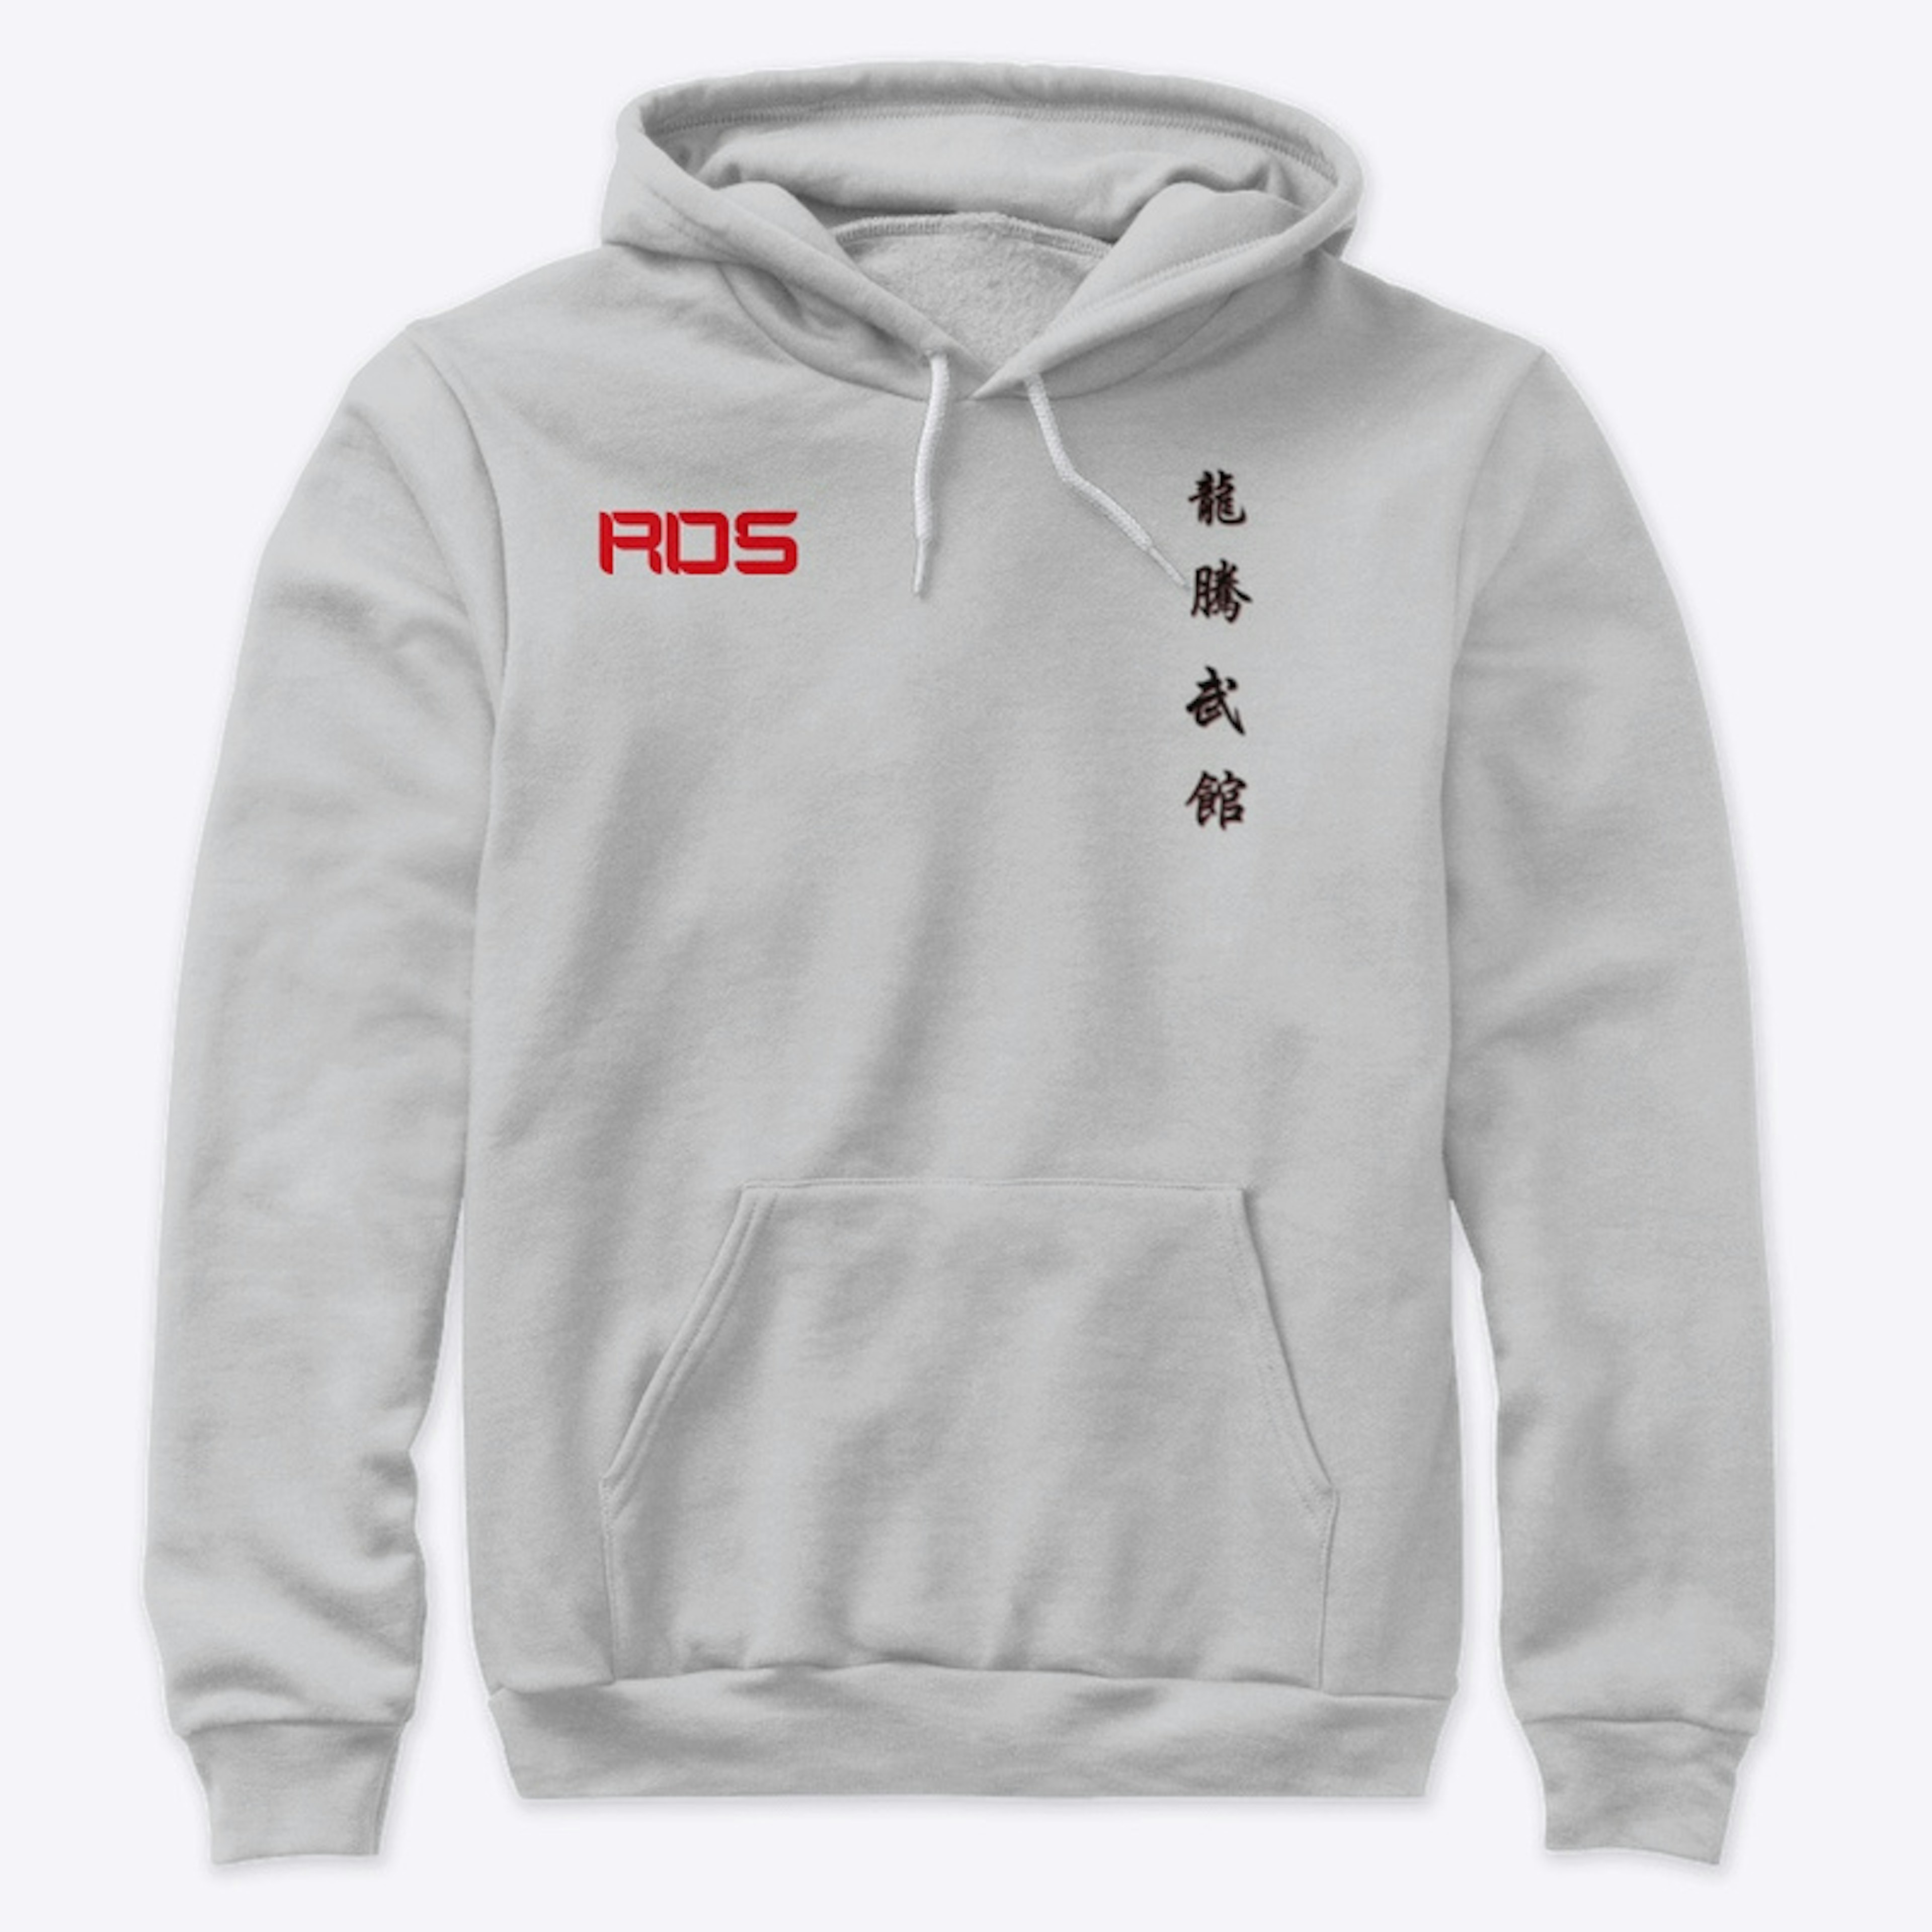 Hoodie - Traditional RDS Style